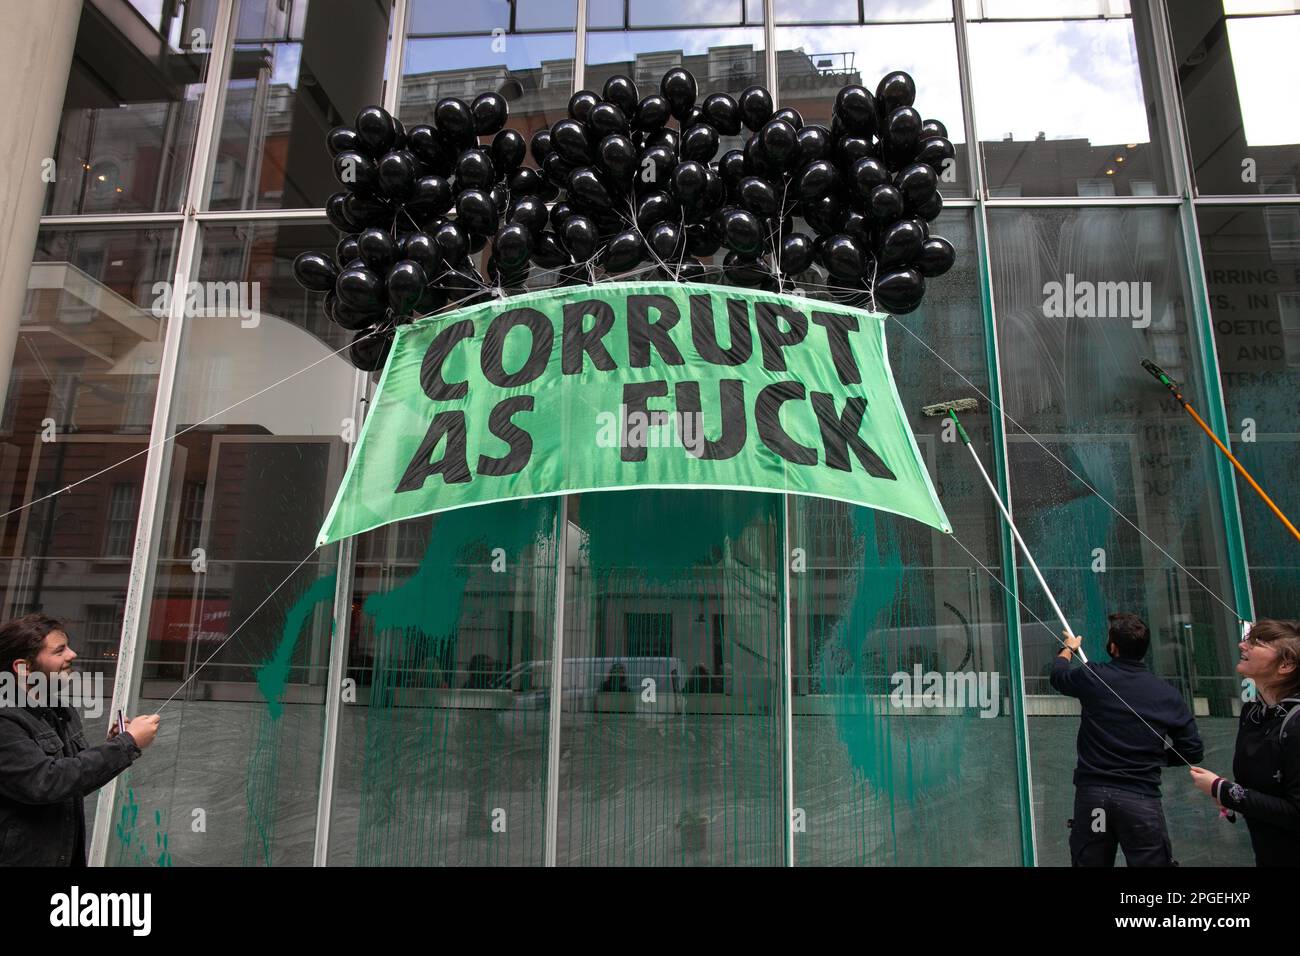 London, England, UK 22 March 2023. Protesters from Extinction Rebellion spray paint on the windows of News Corp, the headquarters of The Sun, in protest at their failure to report on the climate crisis. They held banners with the words 'Tell the Truth' and 'Corrupt as Fuck' emblazoned on them. This was part of a coordinated action where three mainstream news providers were targeted; The Sun, The Daily Mail and The Telegraph. Stock Photo